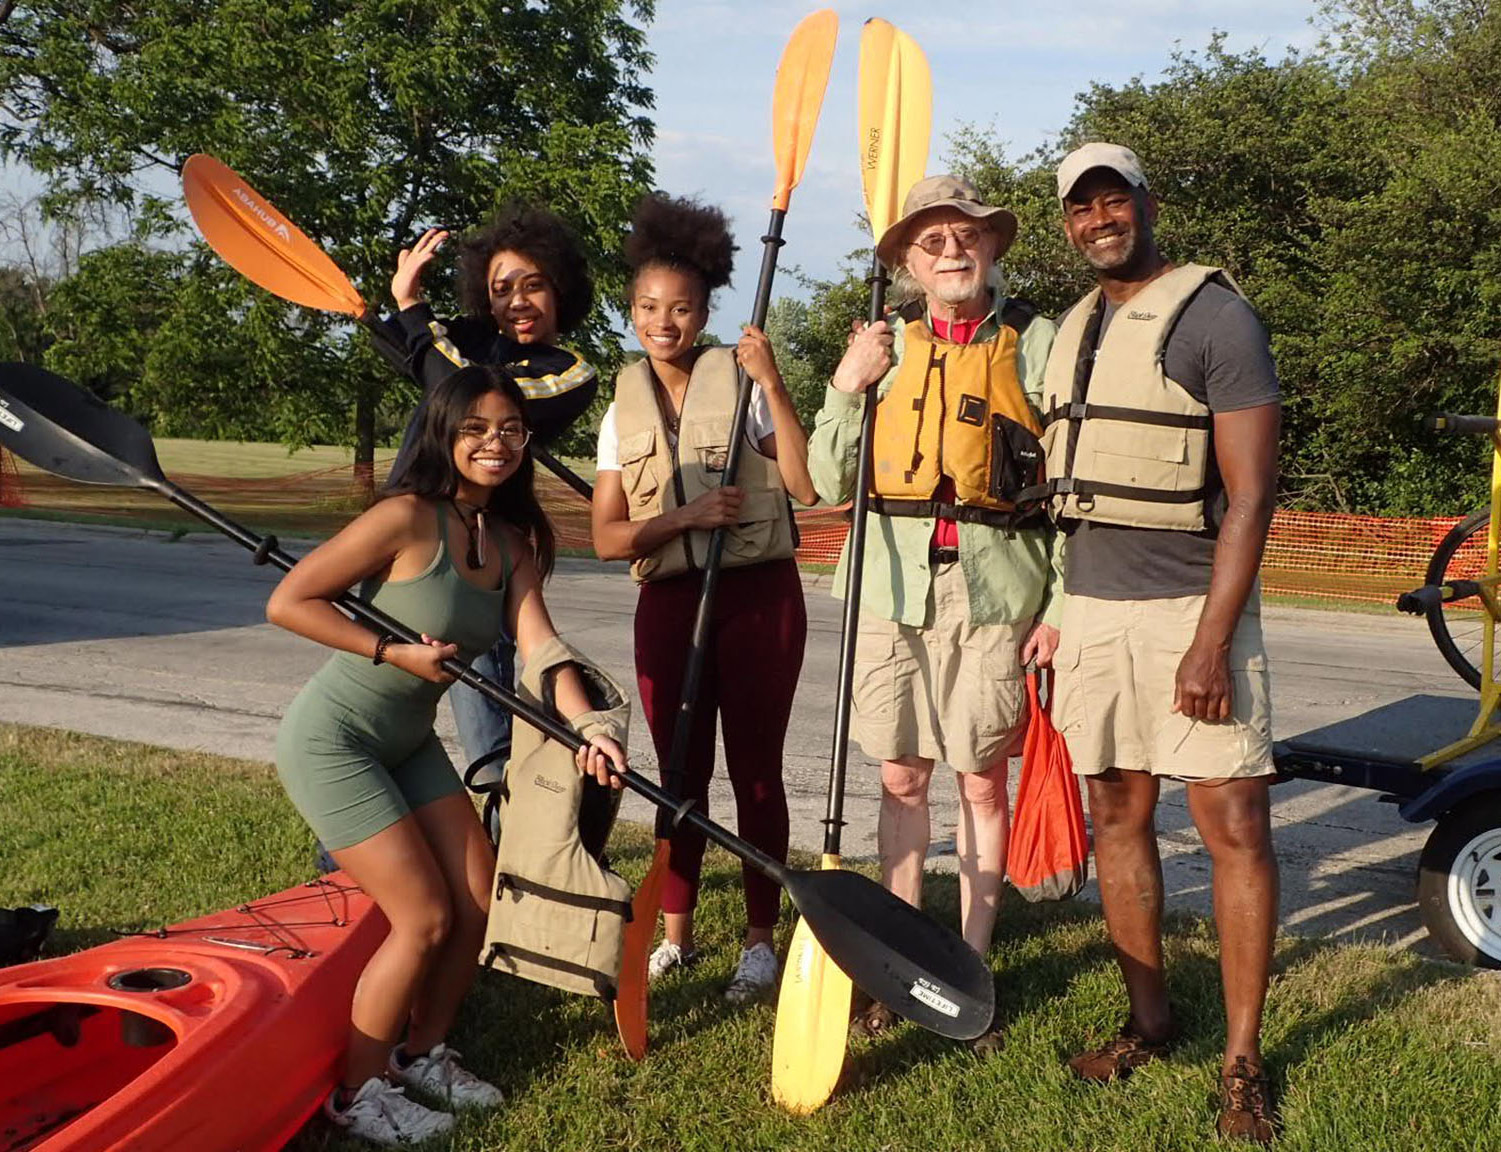 A group of people holding kayak paddles